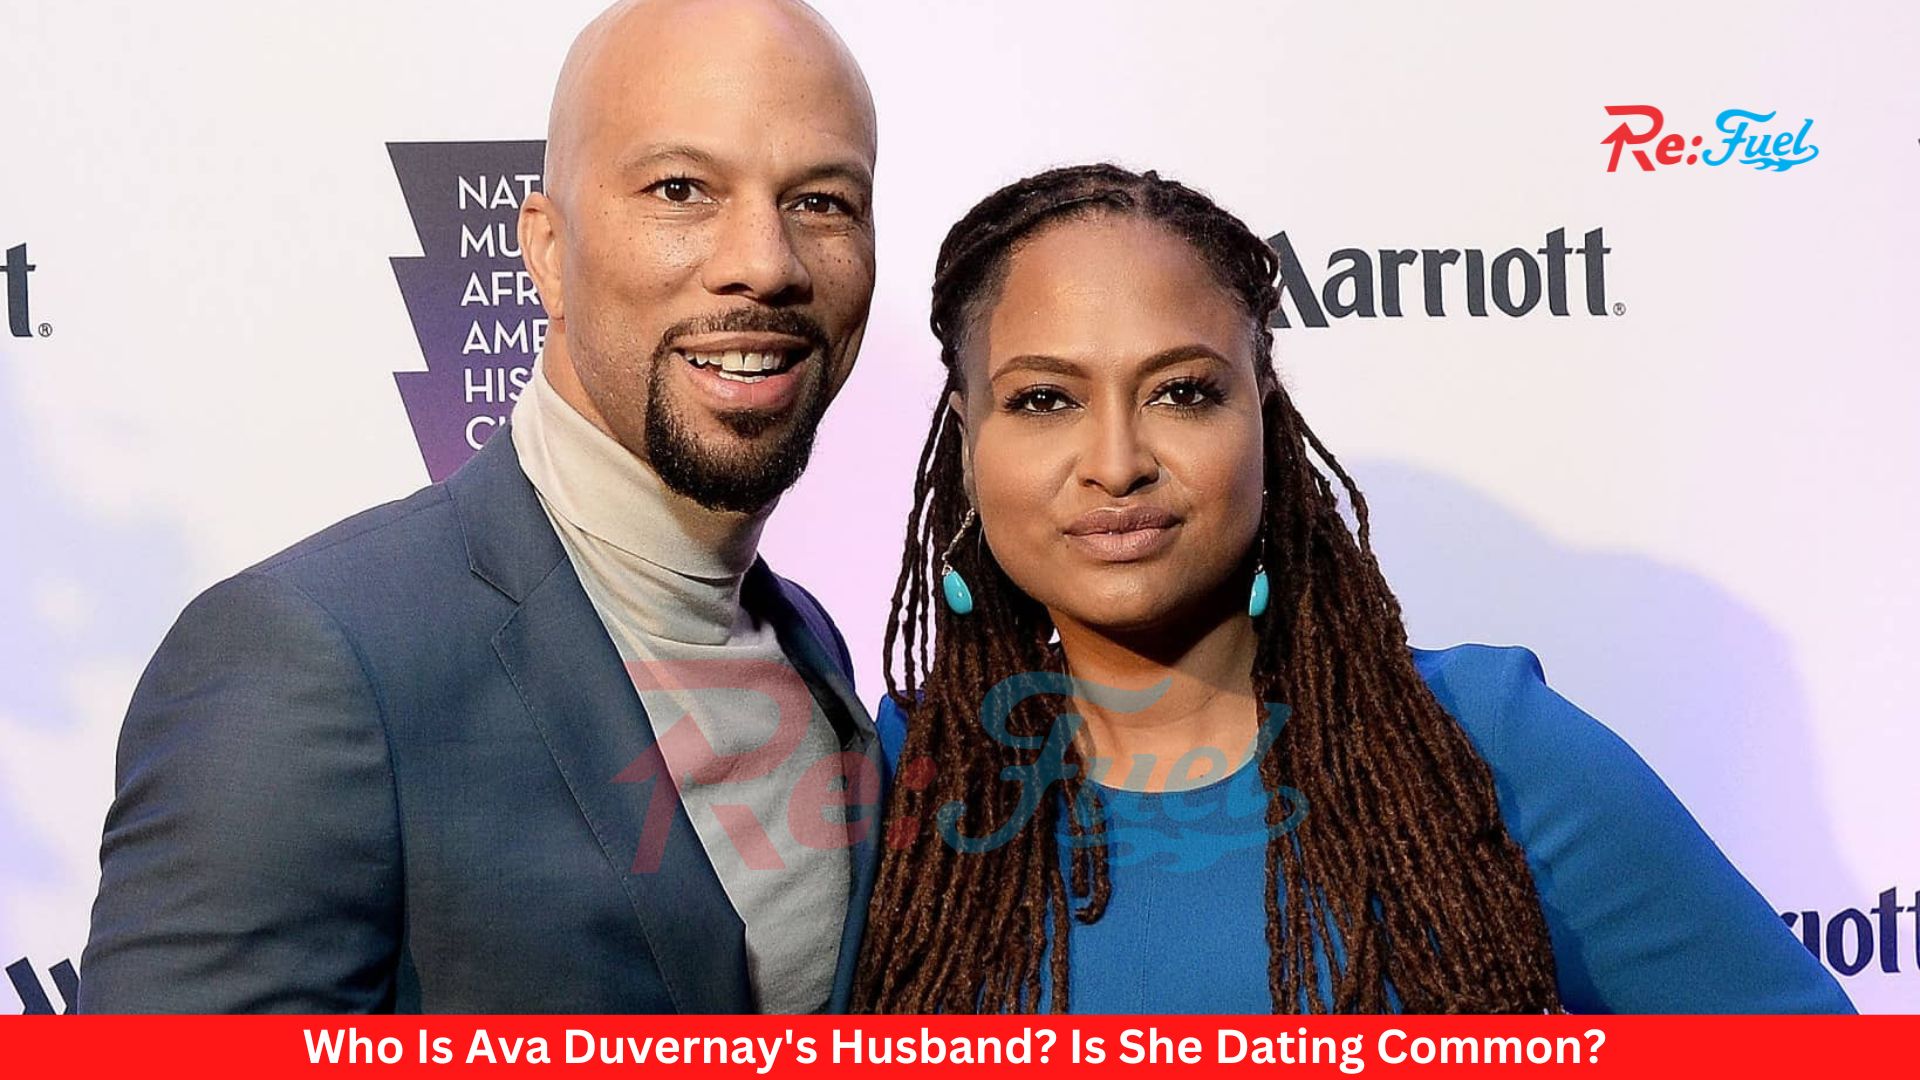 Who Is Ava Duvernay's Husband? Is She Dating Common?